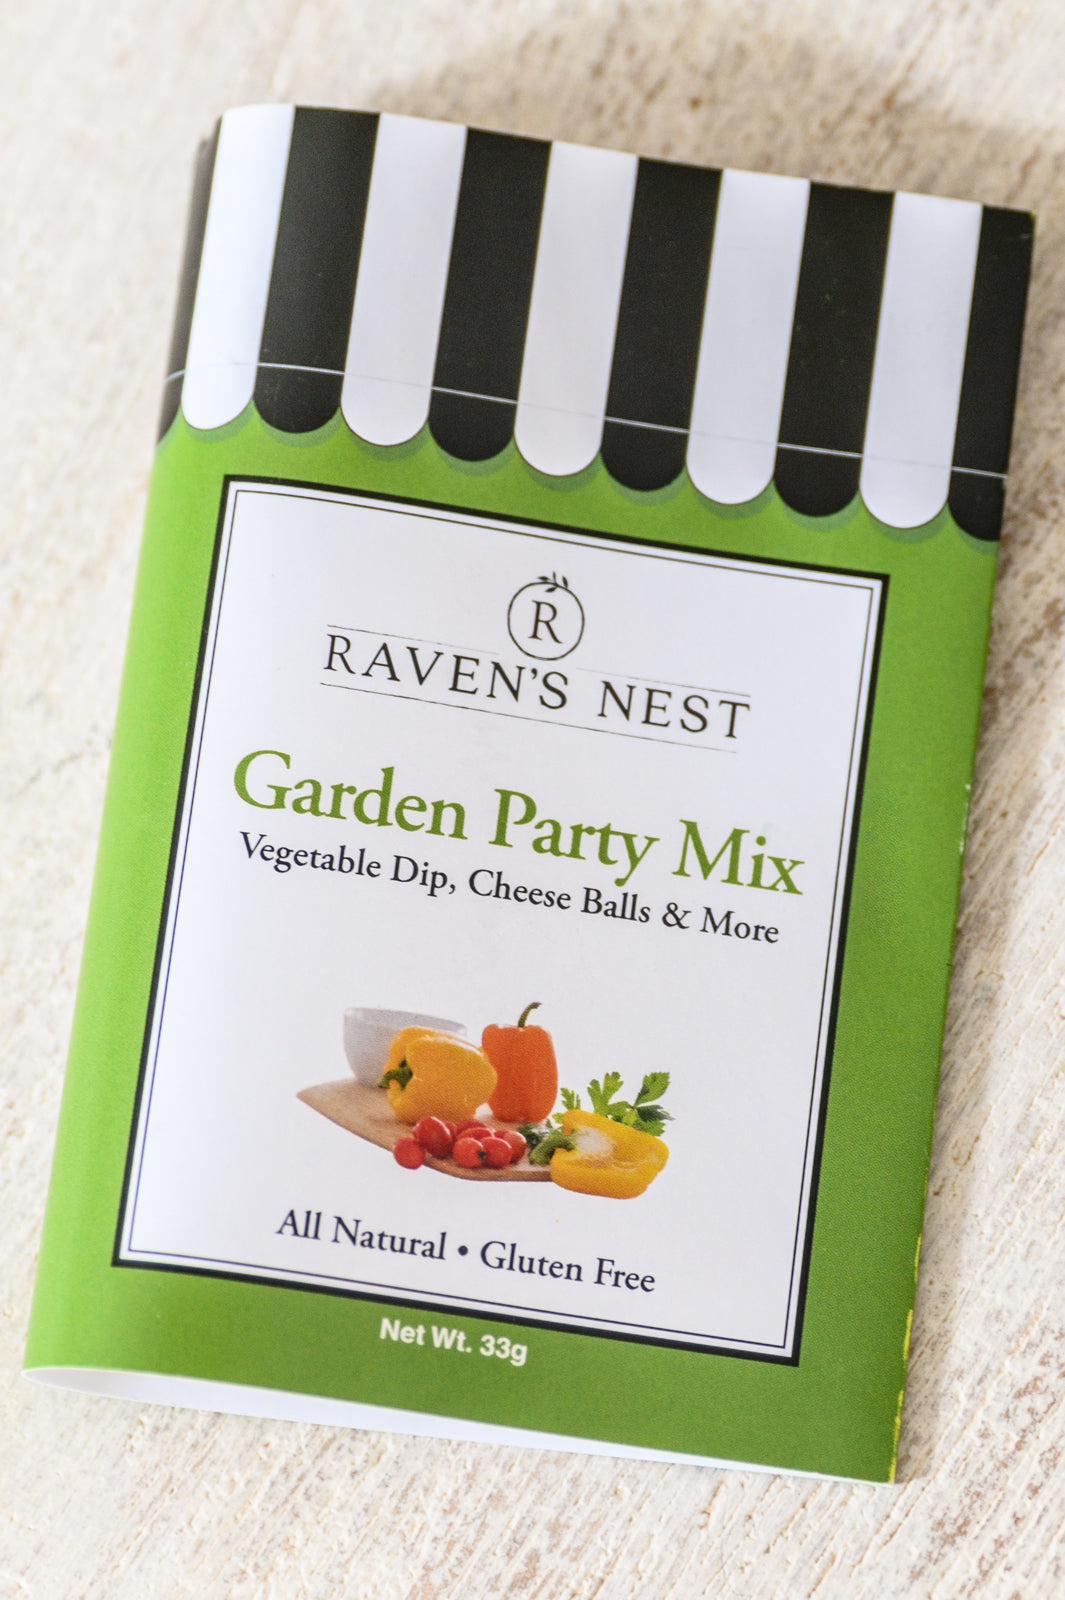 Womens - Garden Party Mix & Seasoning By Raven's Nest